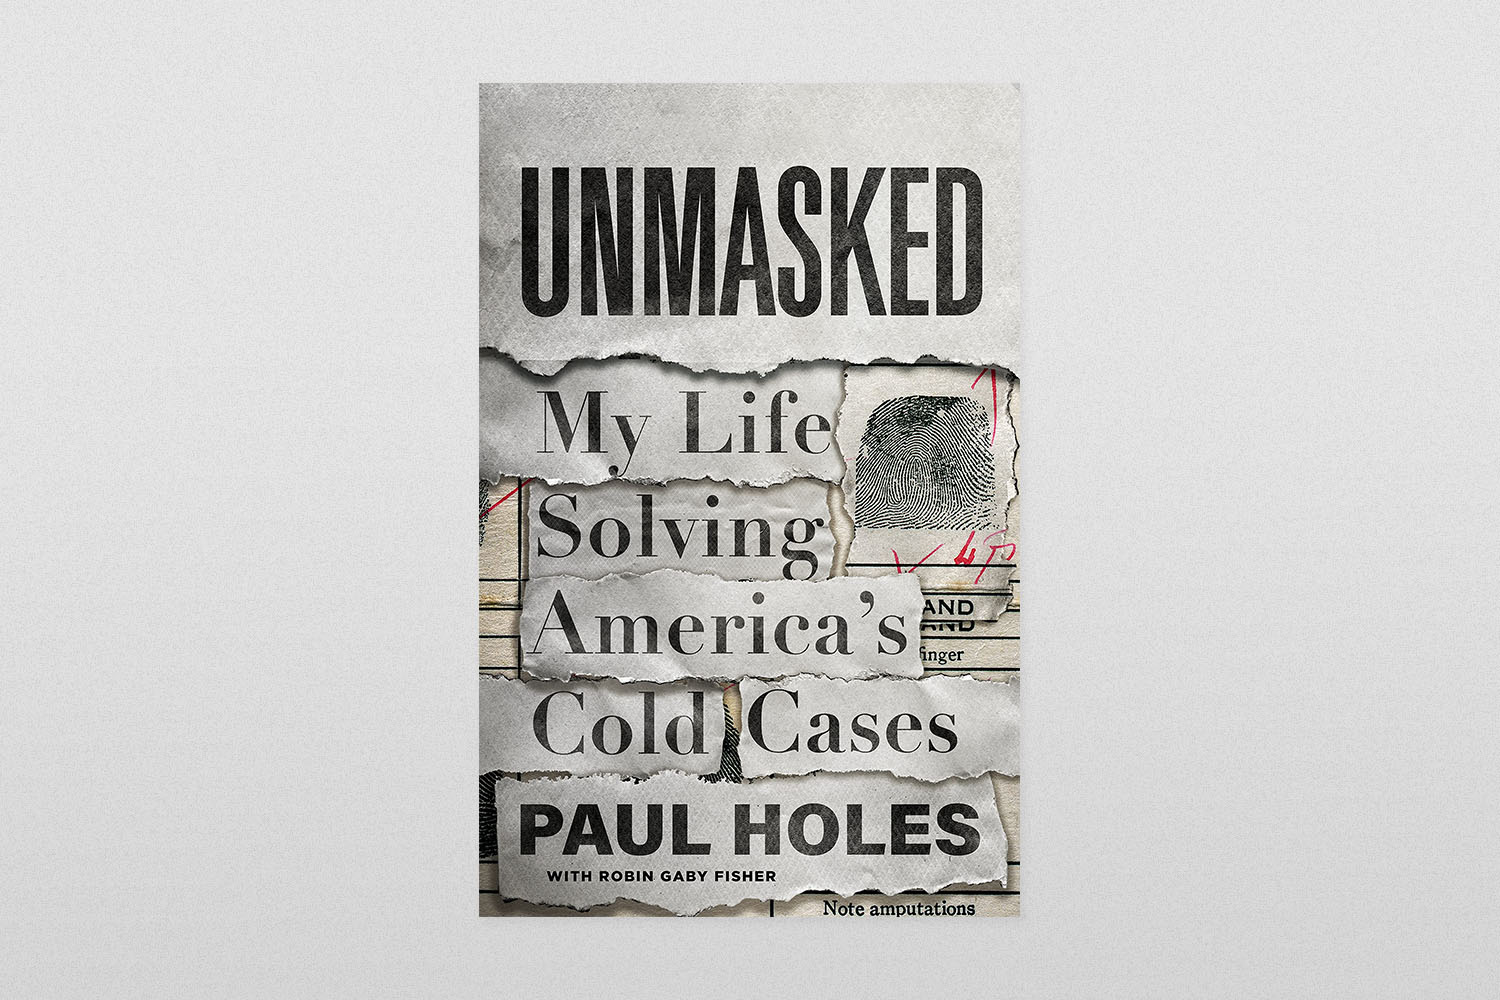 Unmasked- My Life Solving America's Cold Cases by Paul Holes